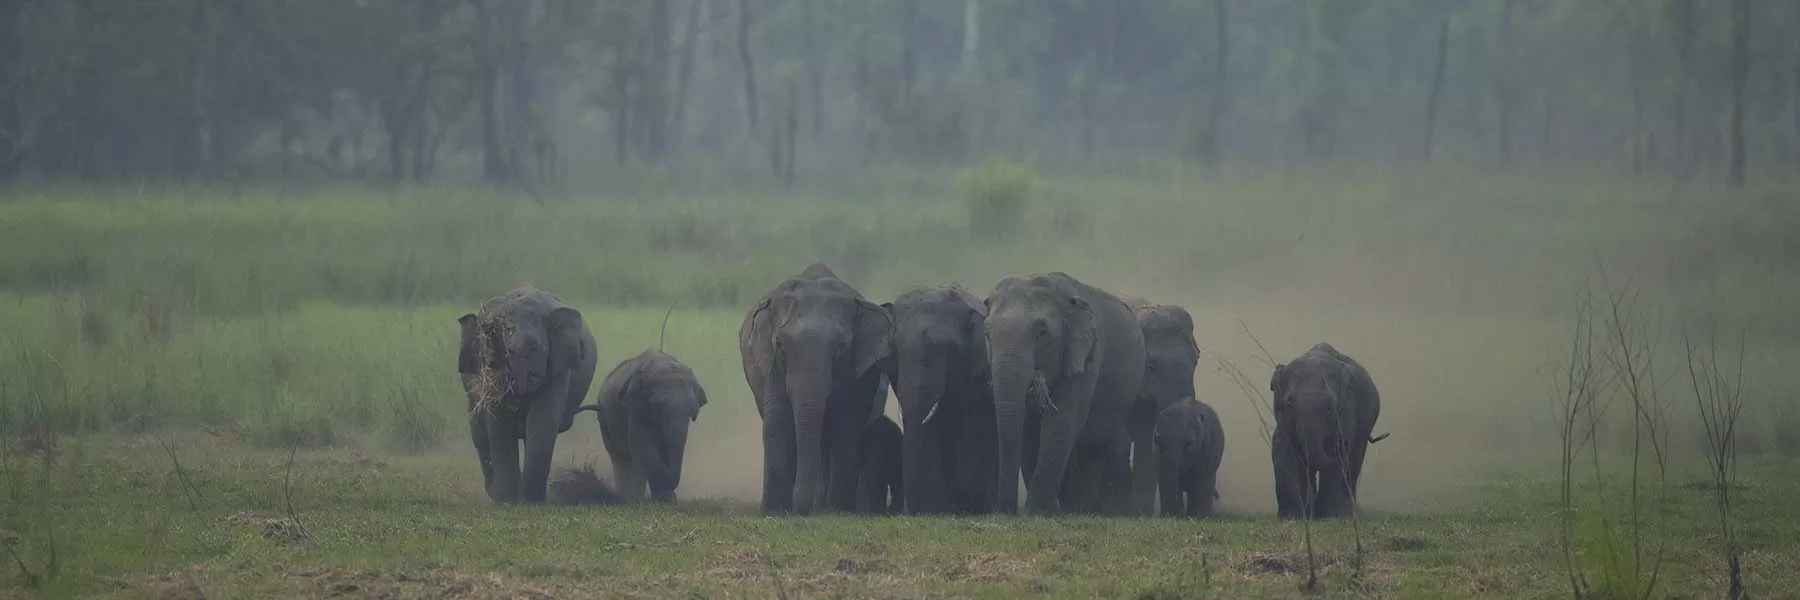 Elephant safaris in India and Africa